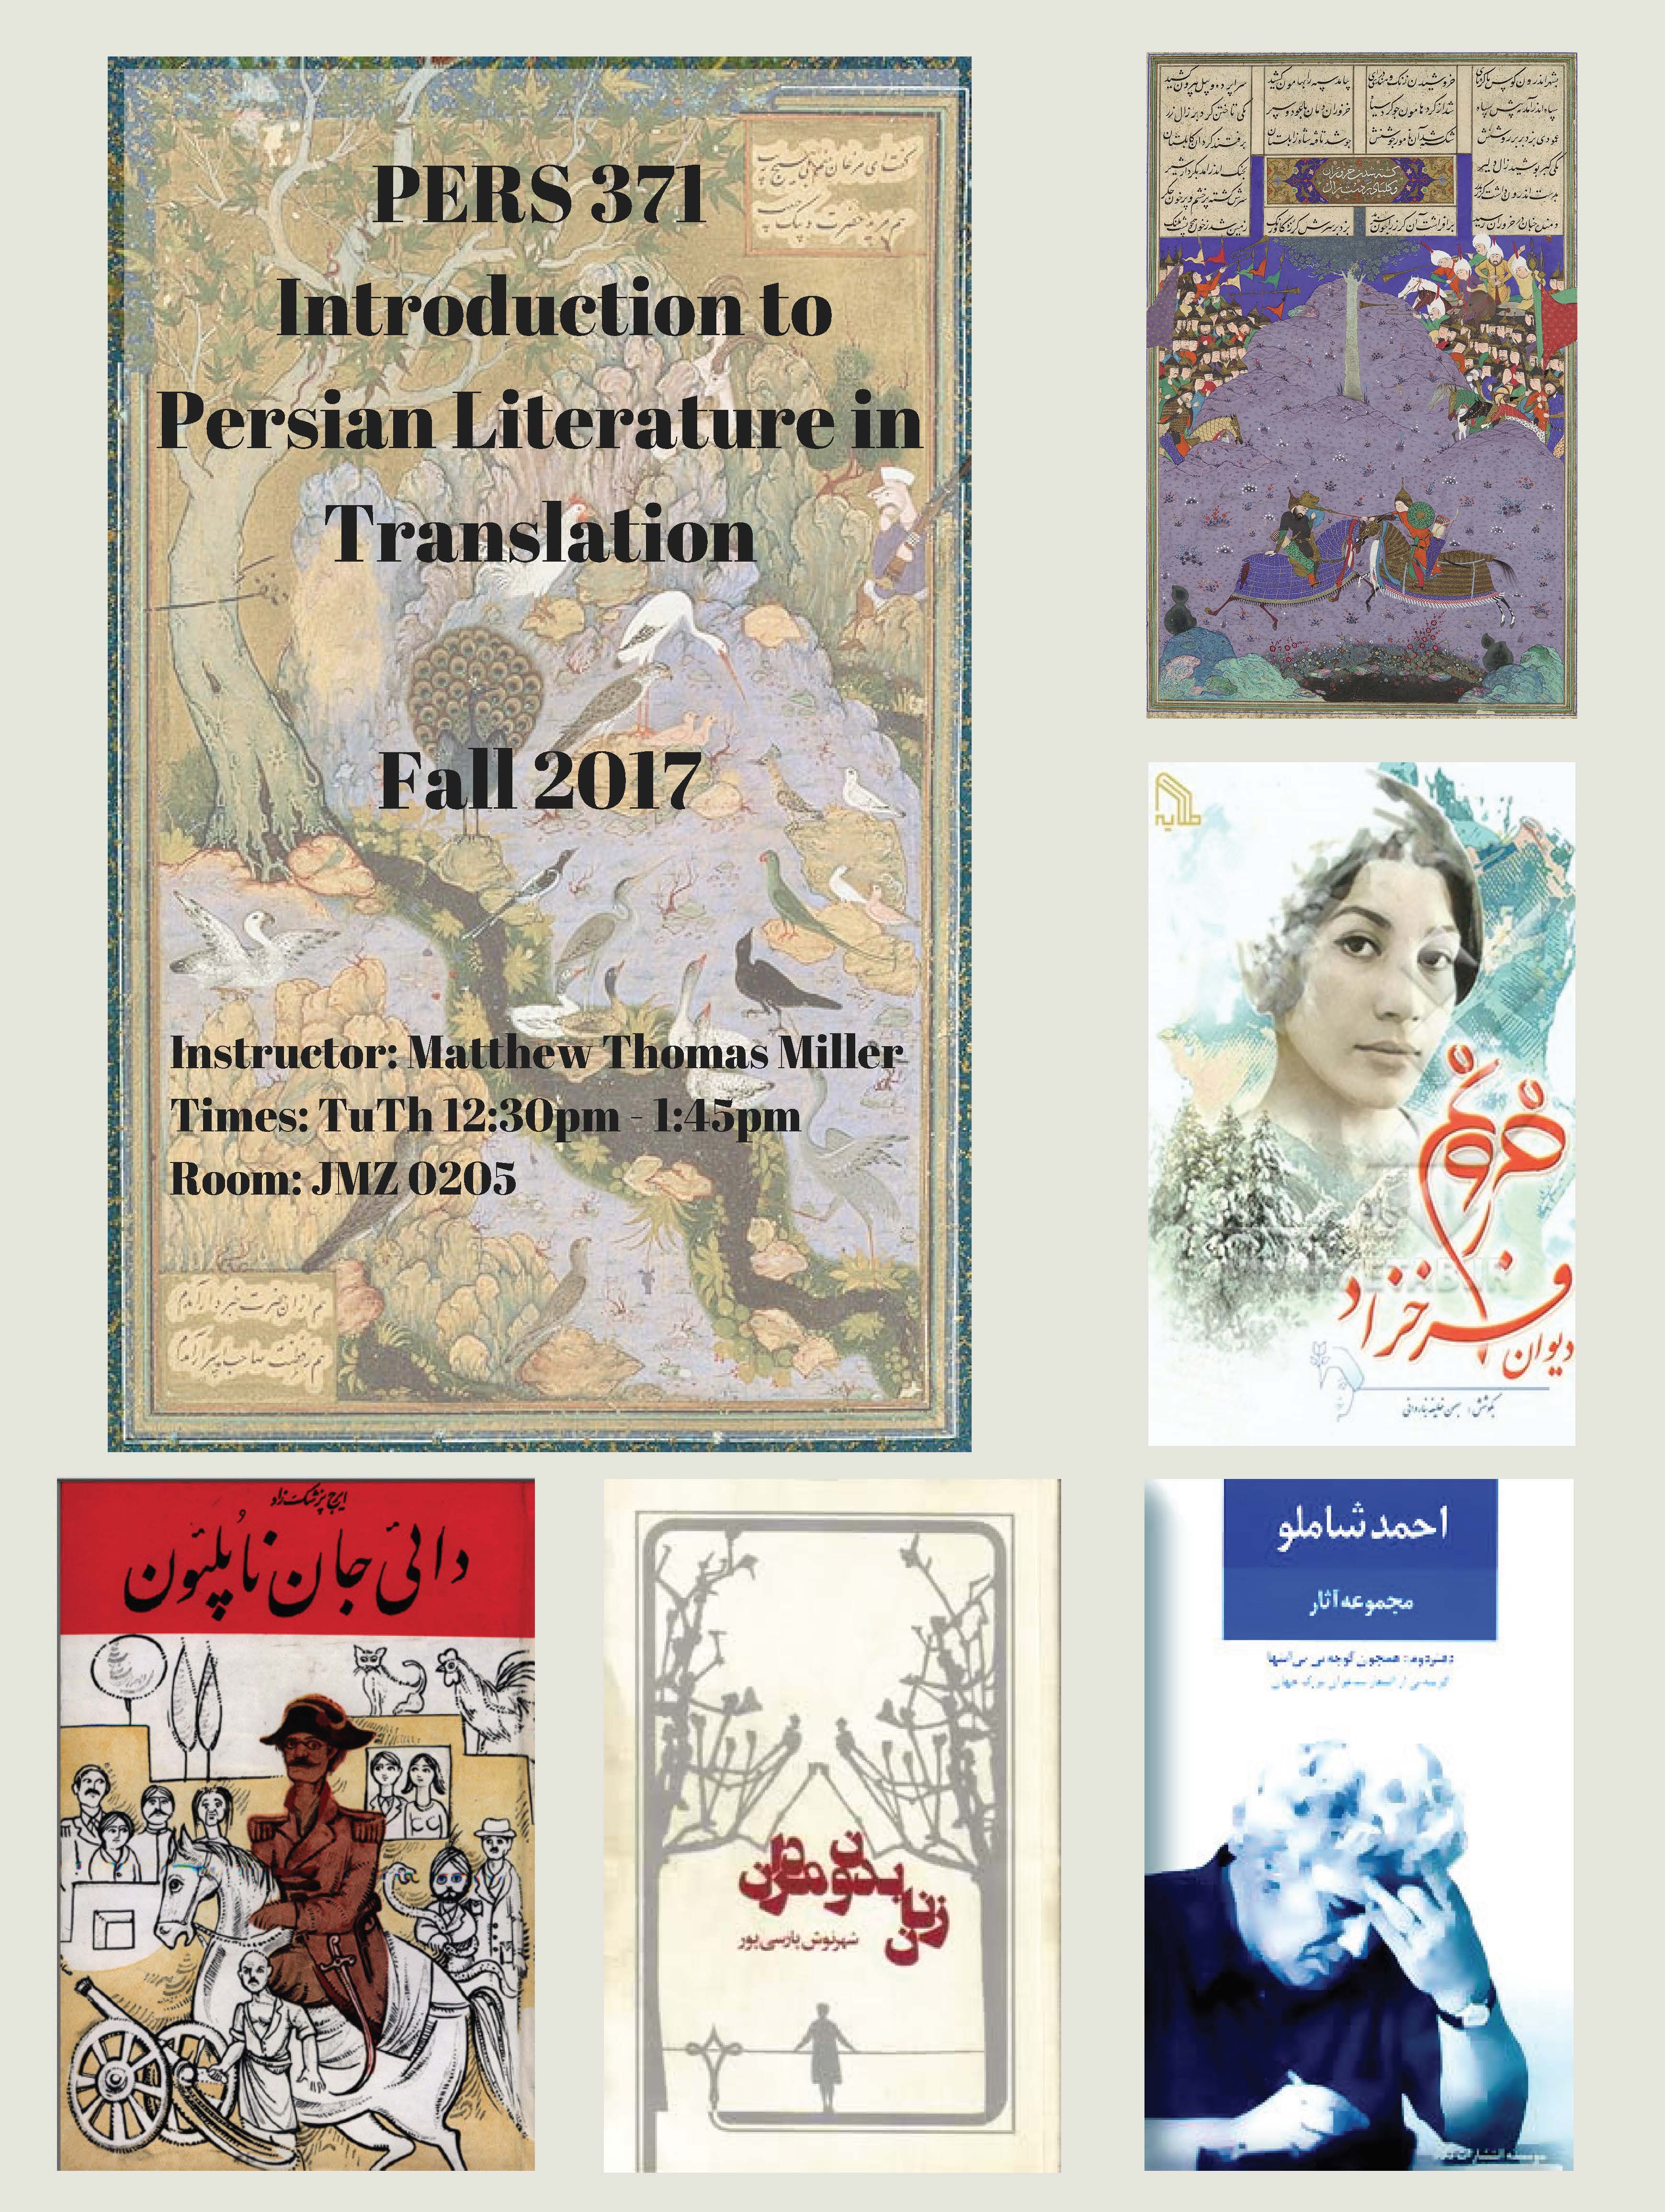 Introduction to Persian Literature in Translation, taught by Matthew Thomas Miller